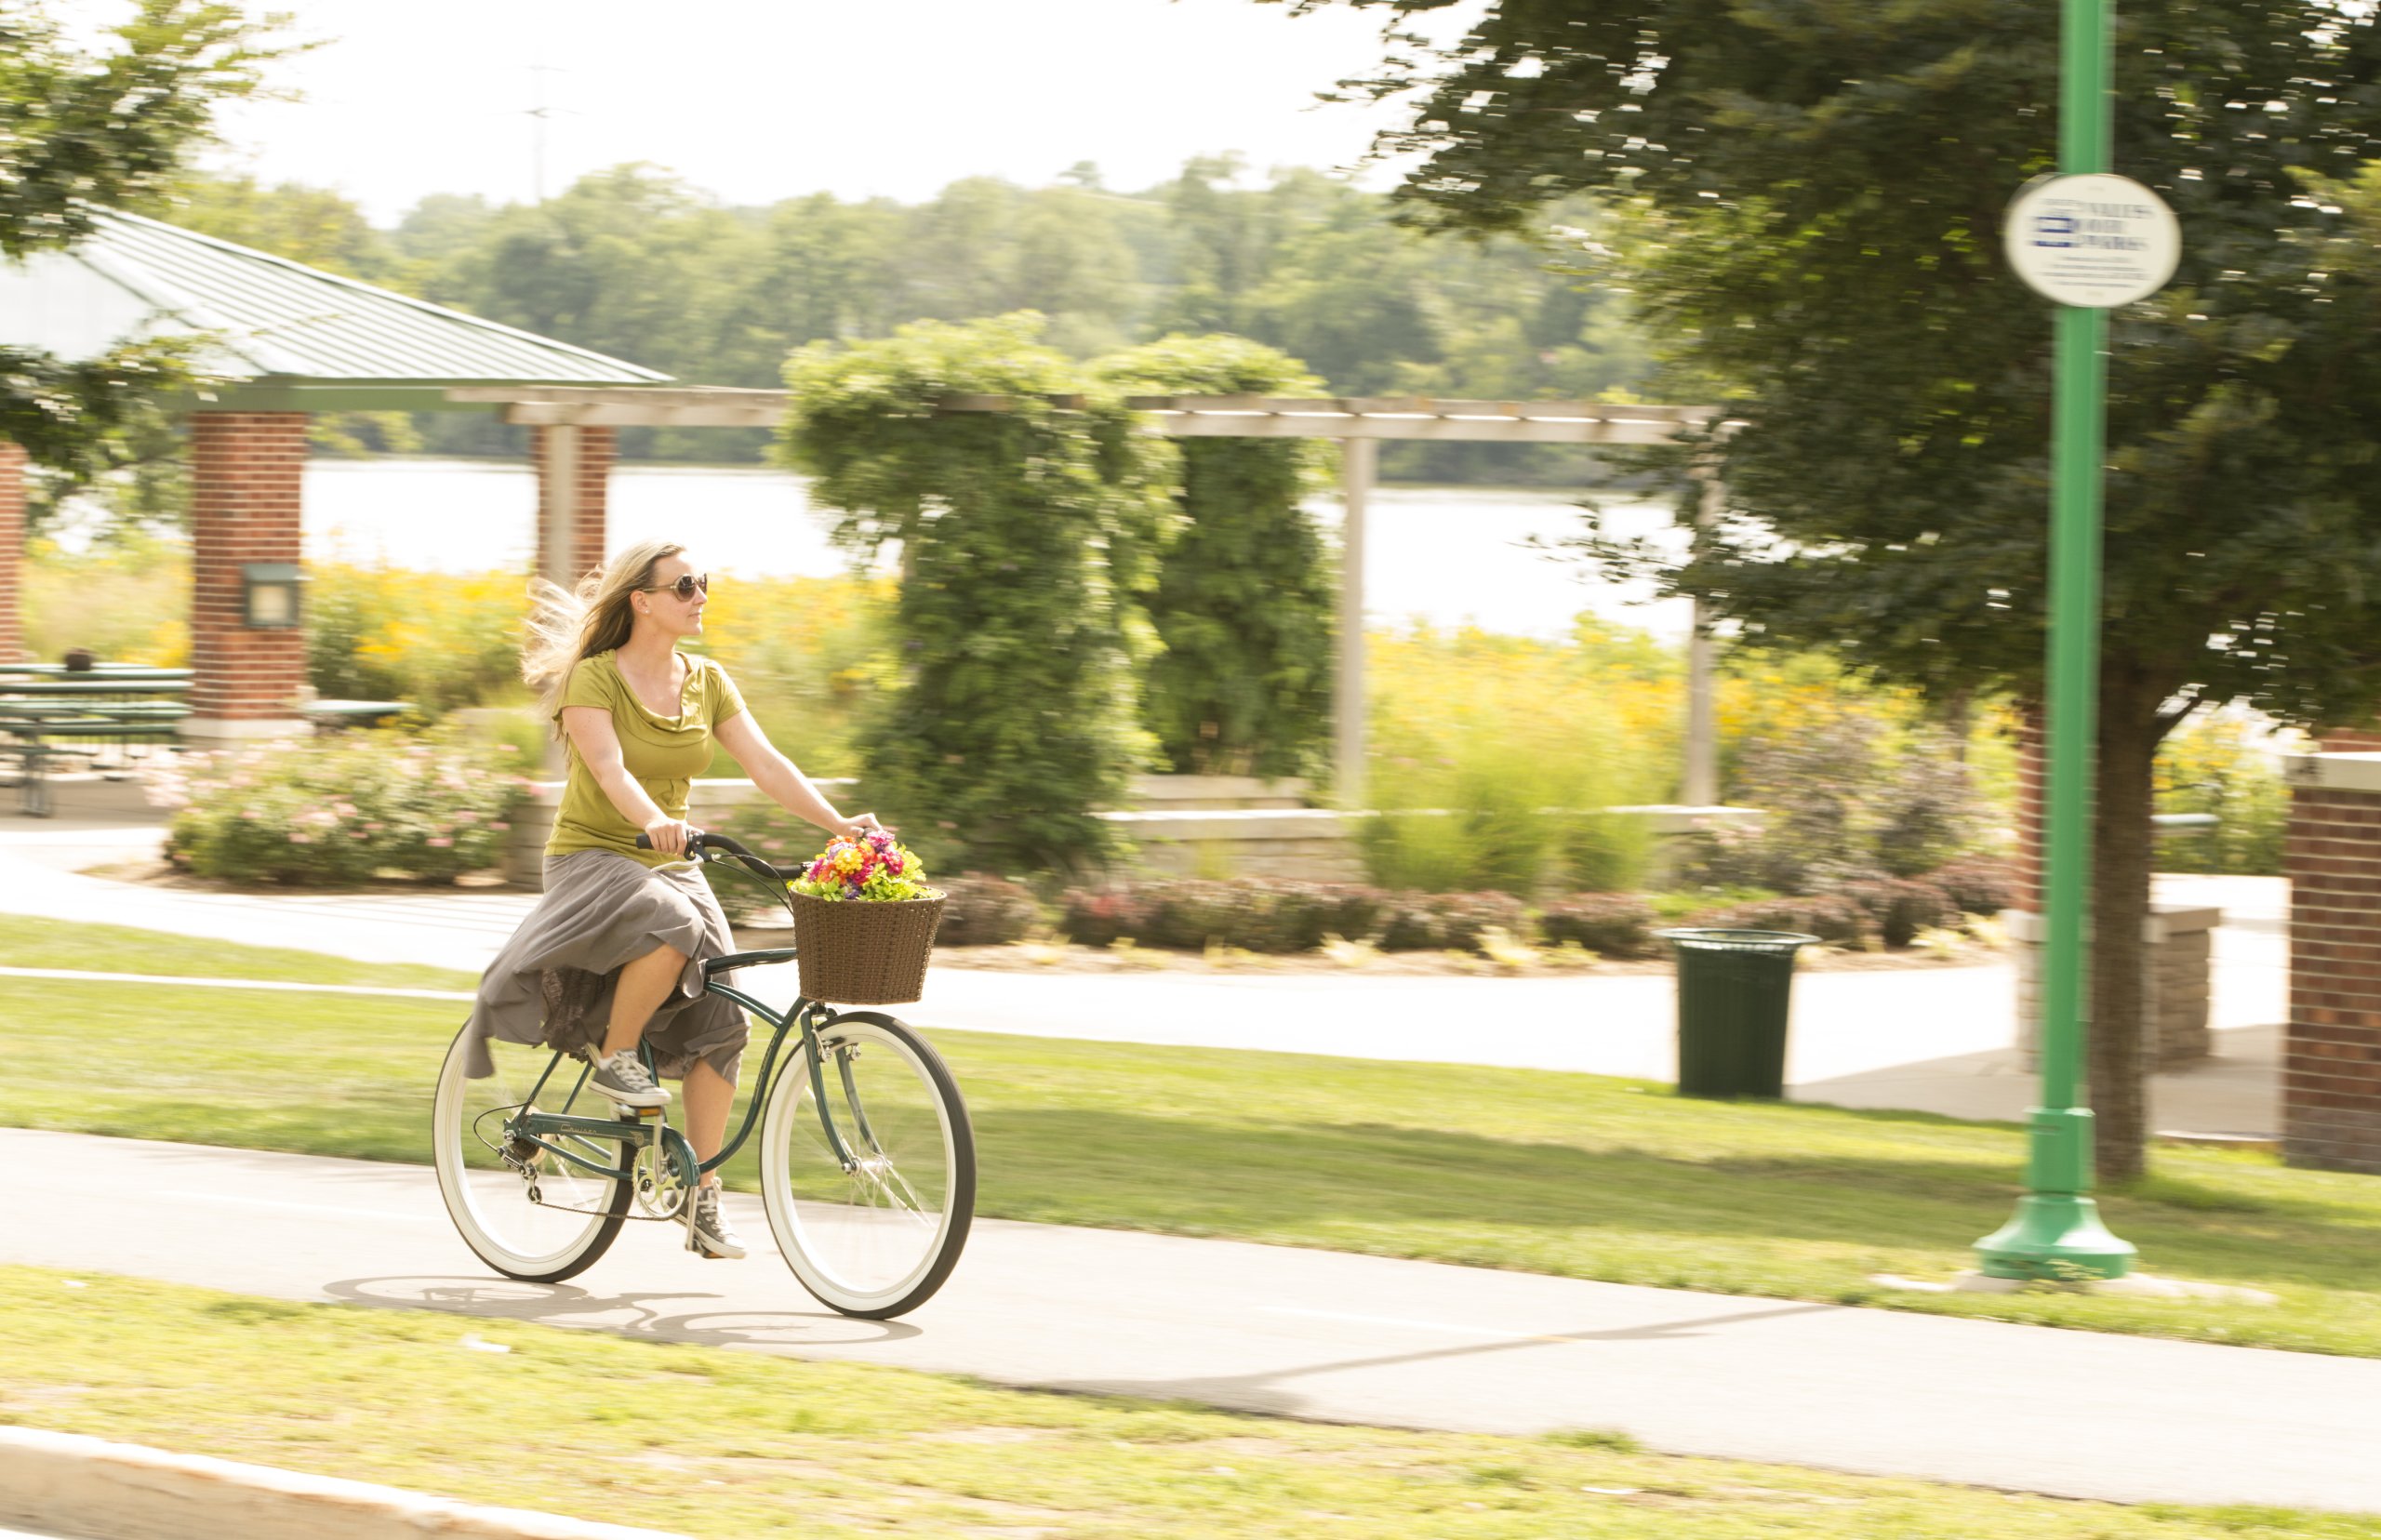 A woman rides a bike with a basket full of flowers along a bike path in a park on a sunny day.